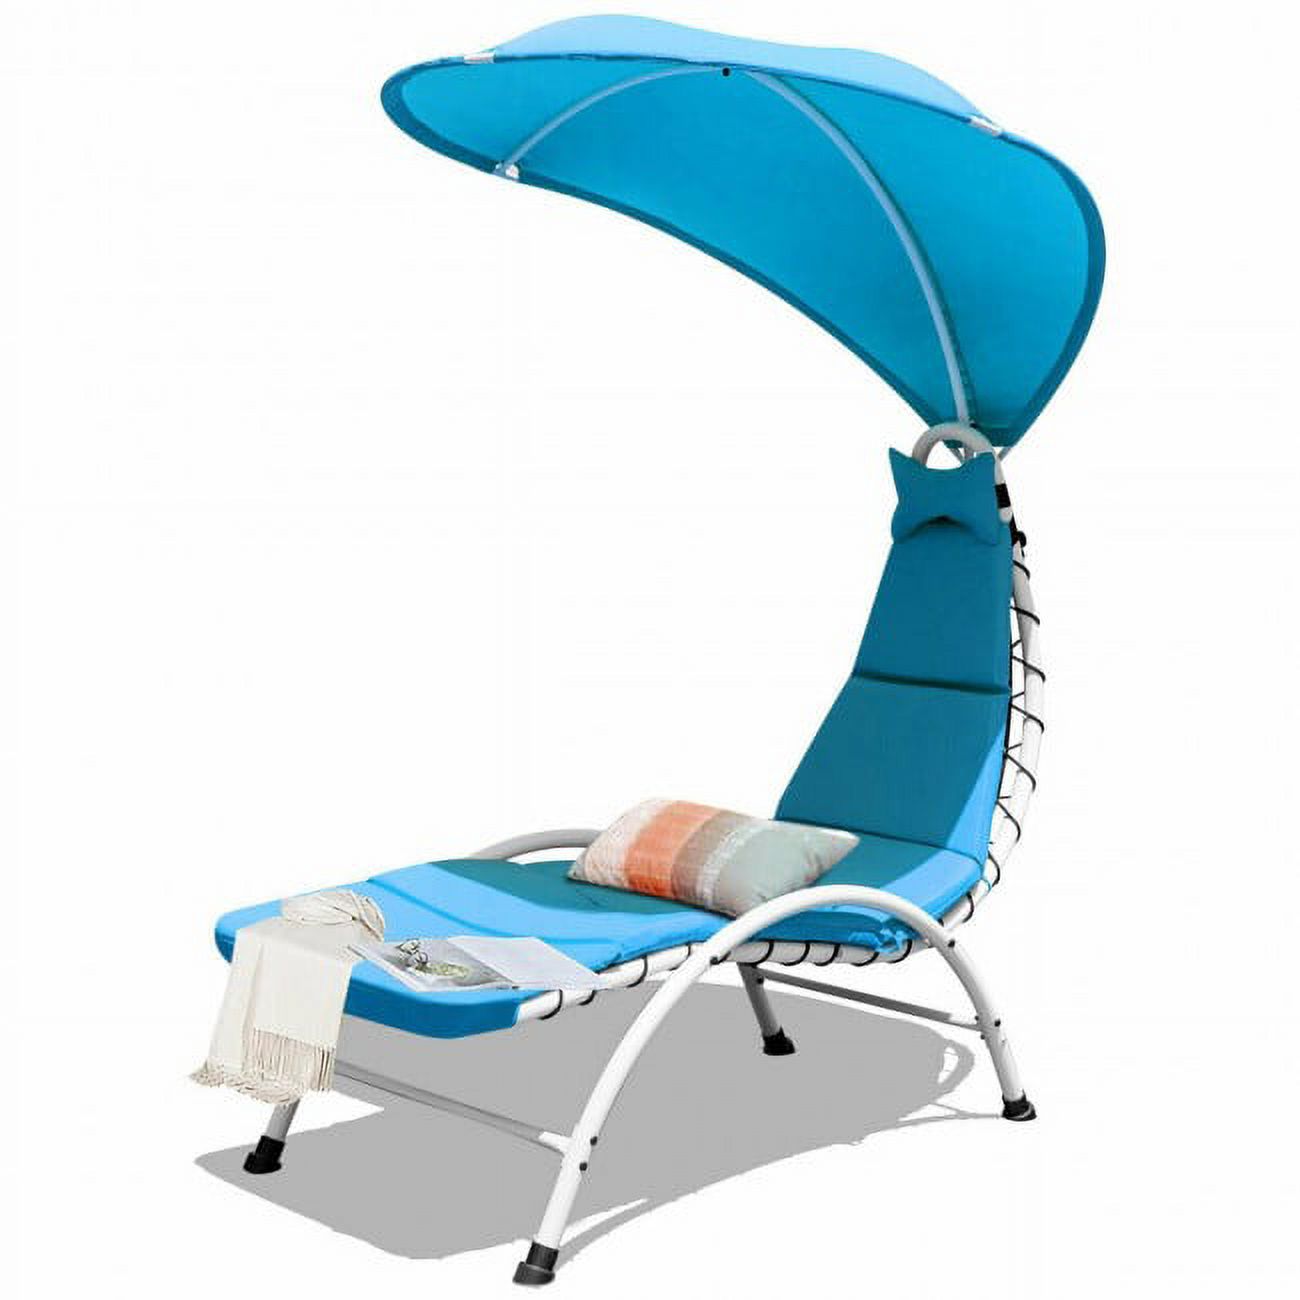 Patio Hanging Swing Hammock Chaise Lounger Chair with Canopy-Blue - image 4 of 7